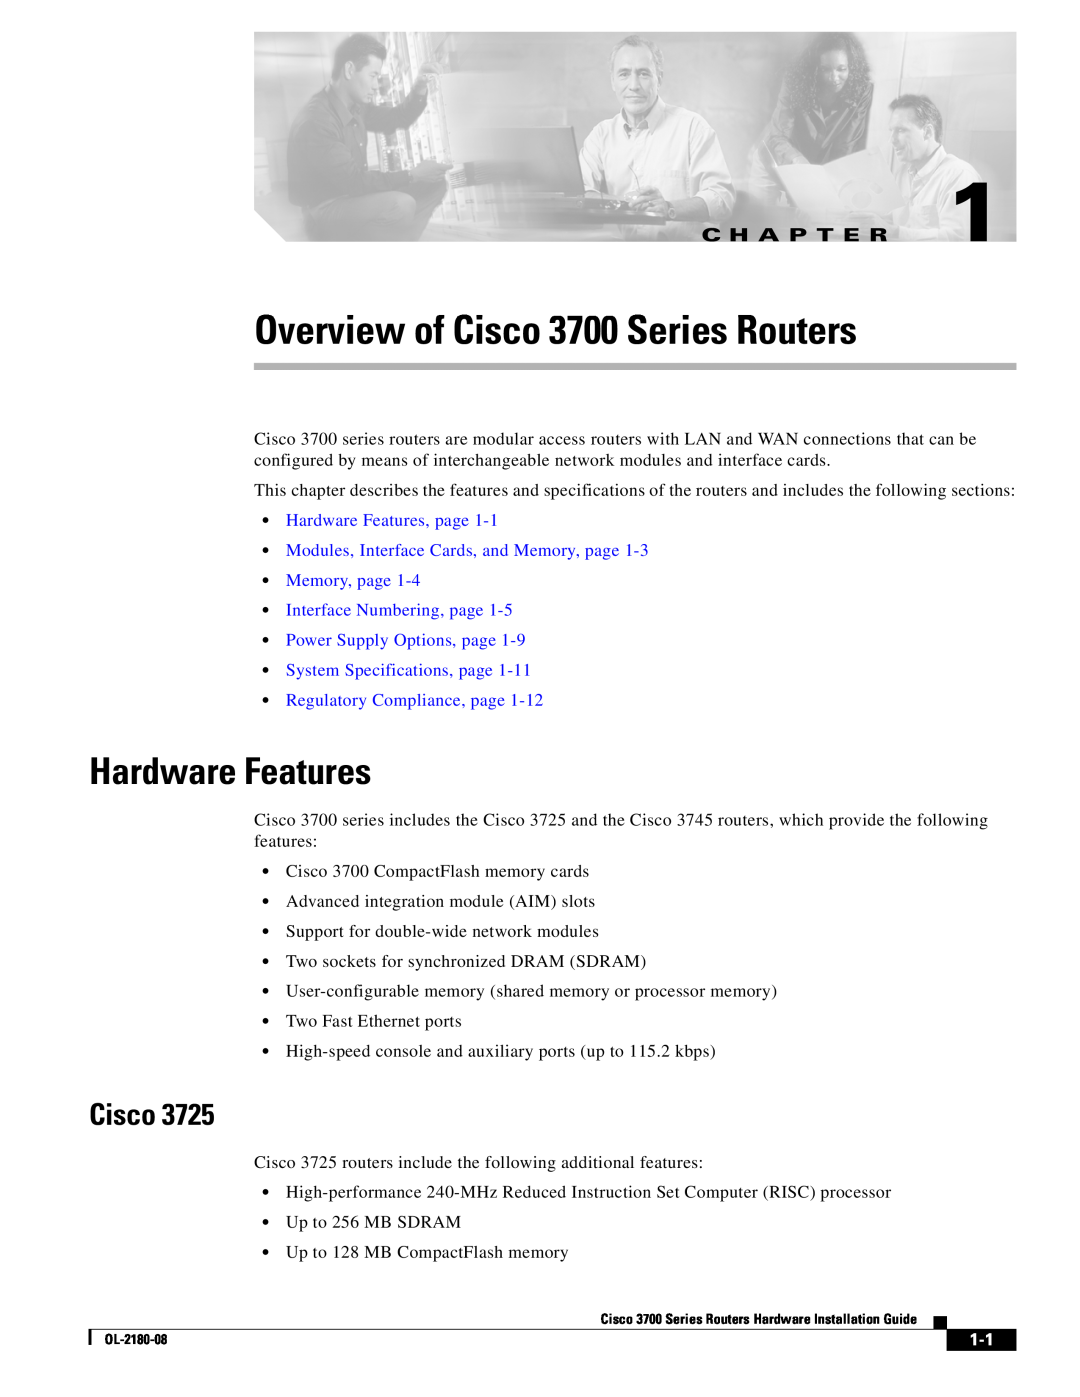 Cisco Systems manual Overview of Cisco 3700 Series Routers, Hardware Features, C H A P T E R 